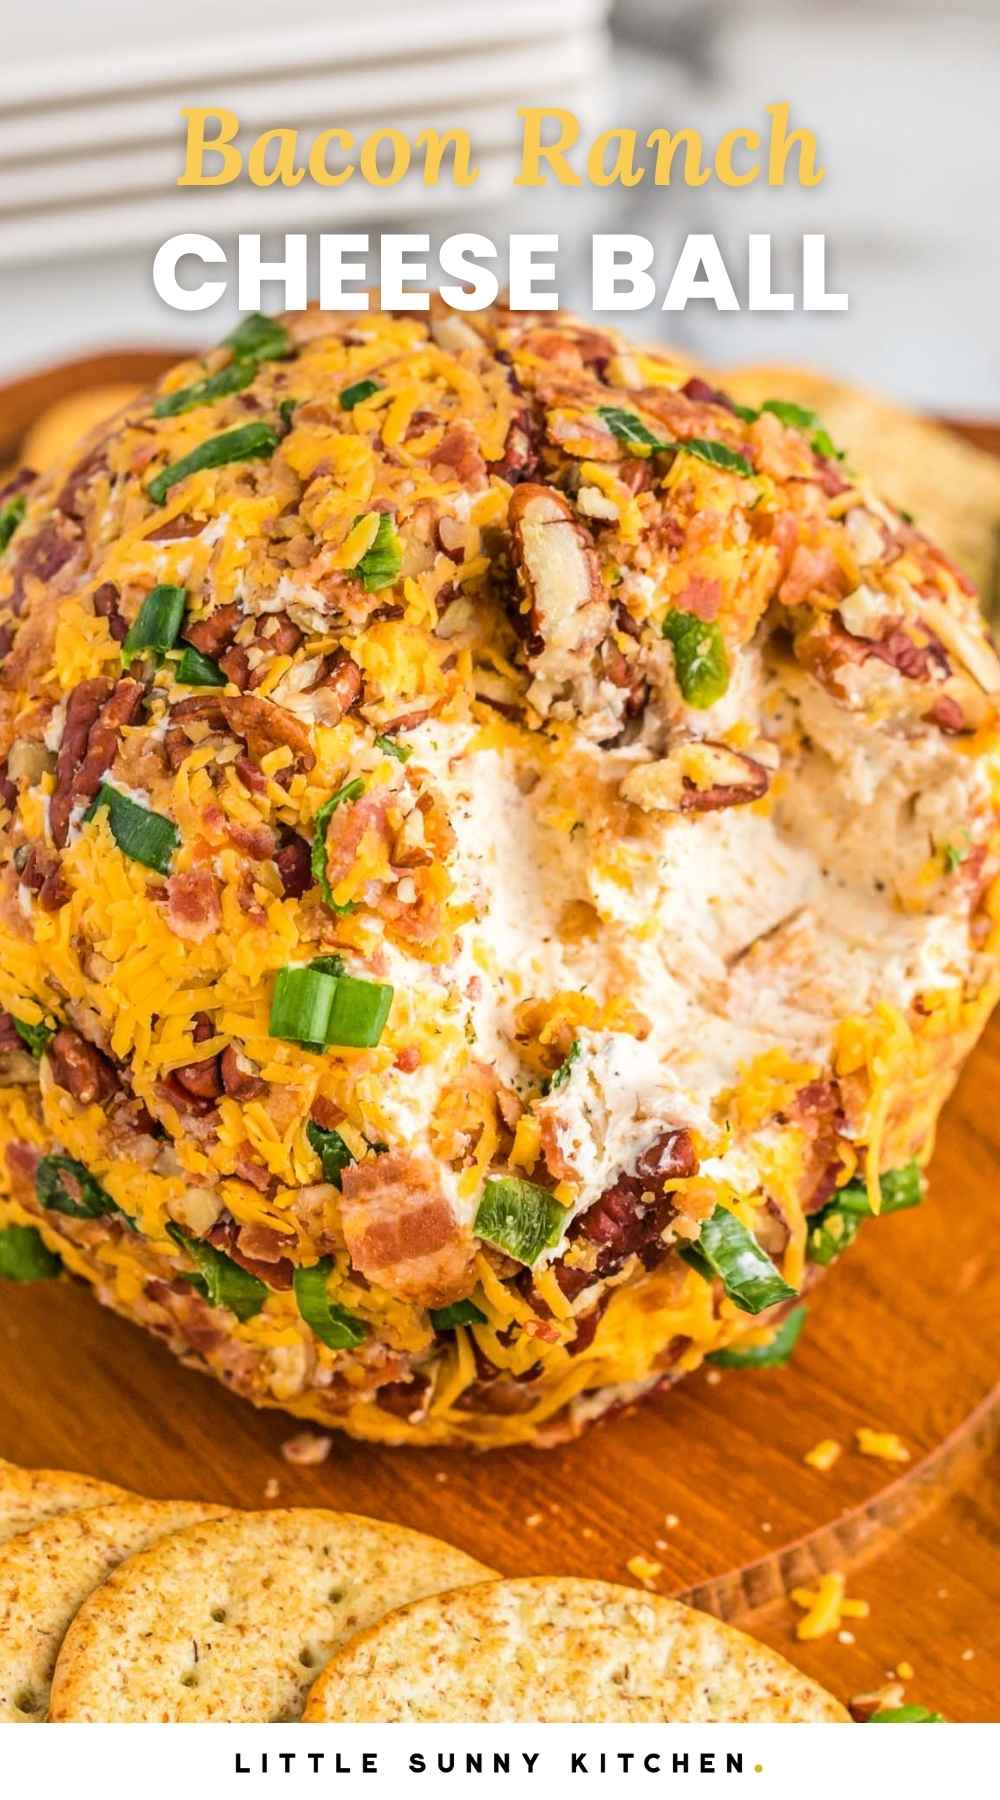 The Best Bacon Ranch Cheese Ball Recipe - Little Sunny Kitchen